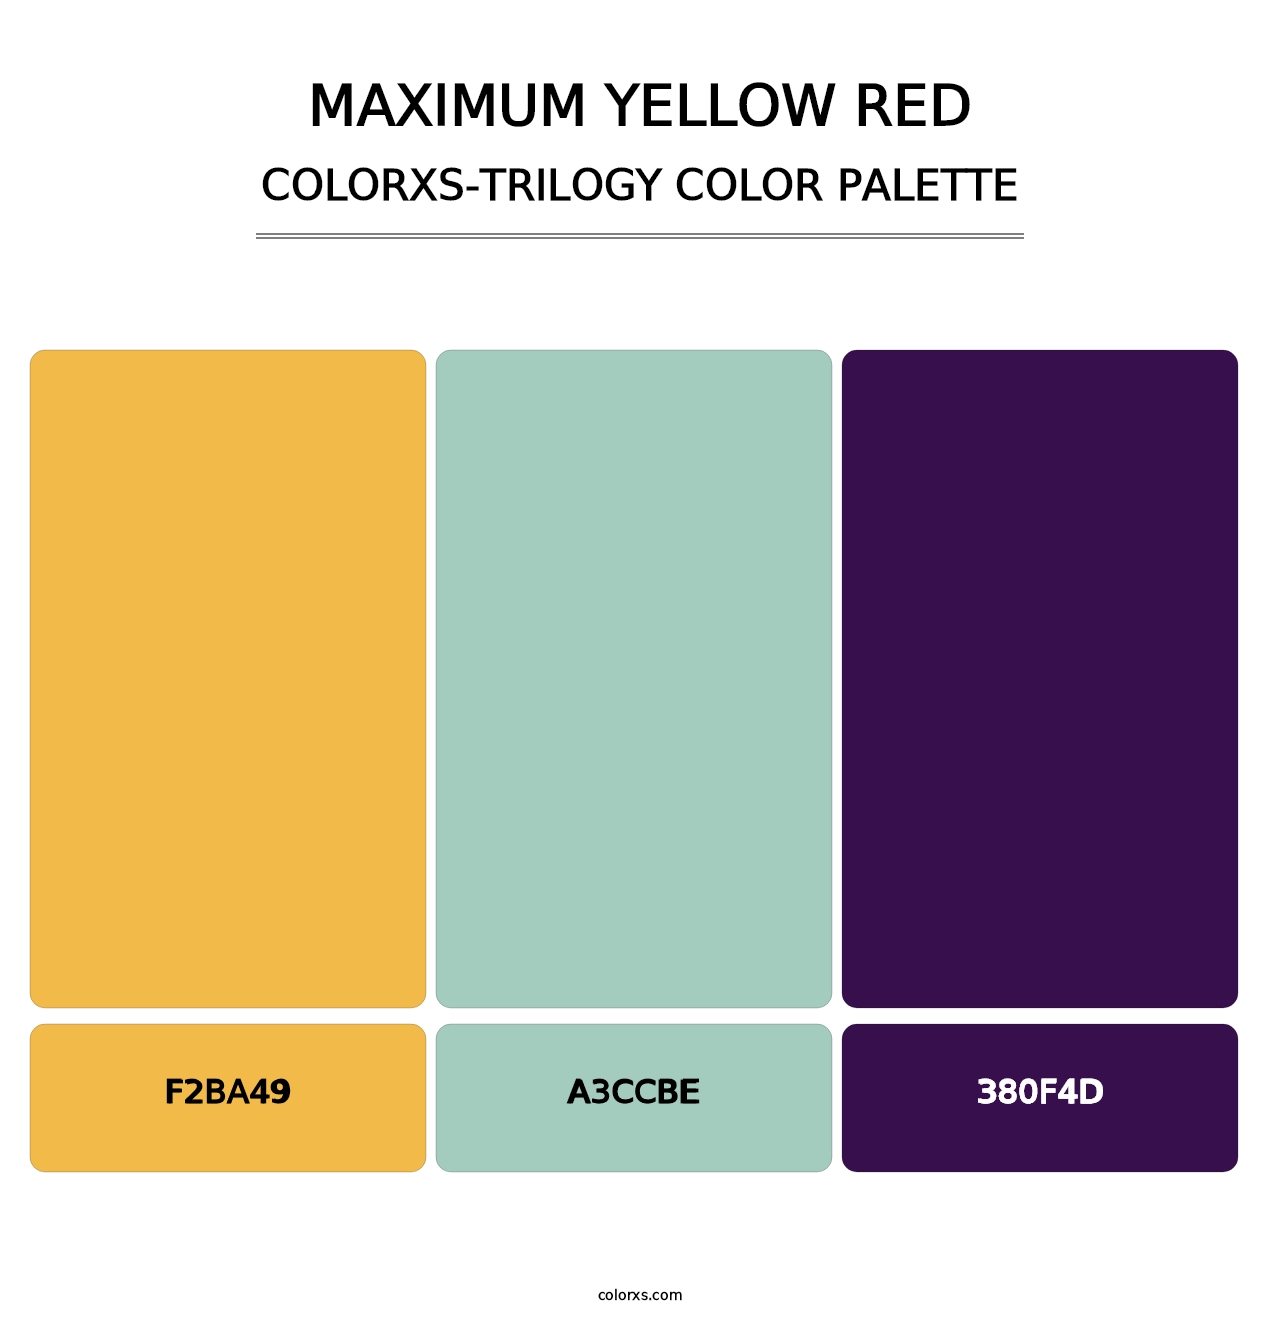 Maximum Yellow Red - Colorxs Trilogy Palette